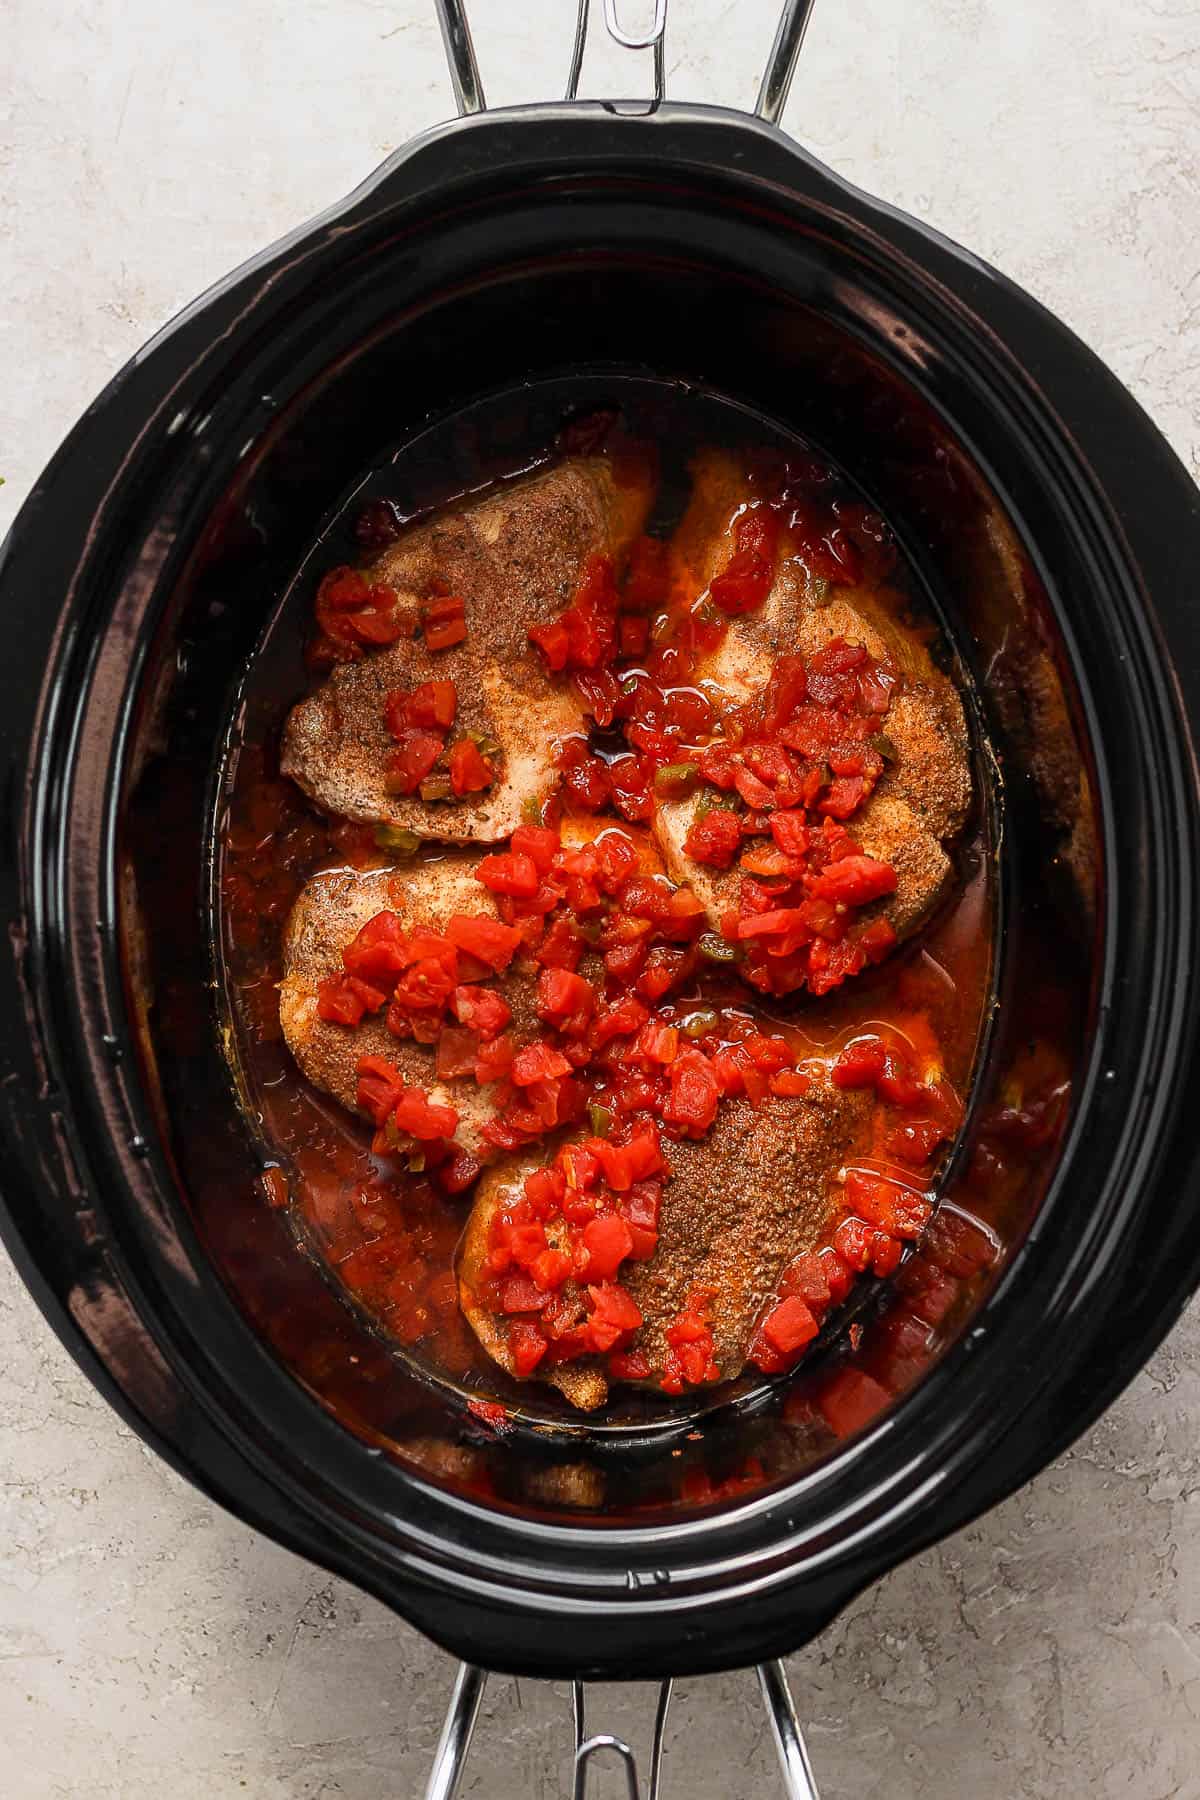 Seasoned chicken breast topped with diced tomatoes and green chiles in a slow cooker.